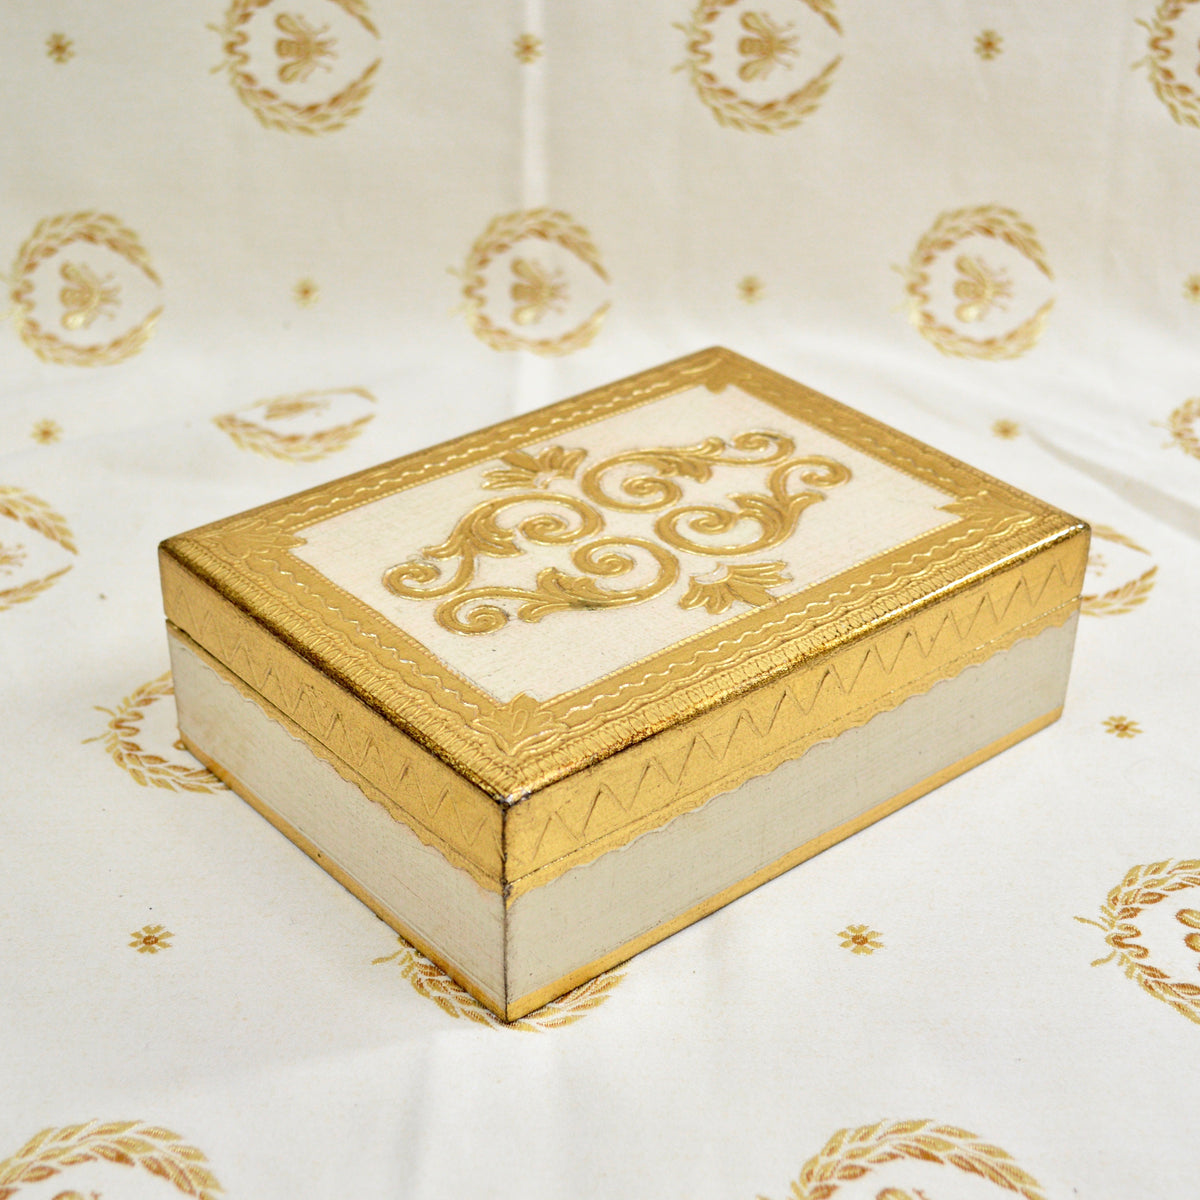 Florentine Gilded Wood Storage Box, Rectangle, Small, Made In Italy - My Italian Decor